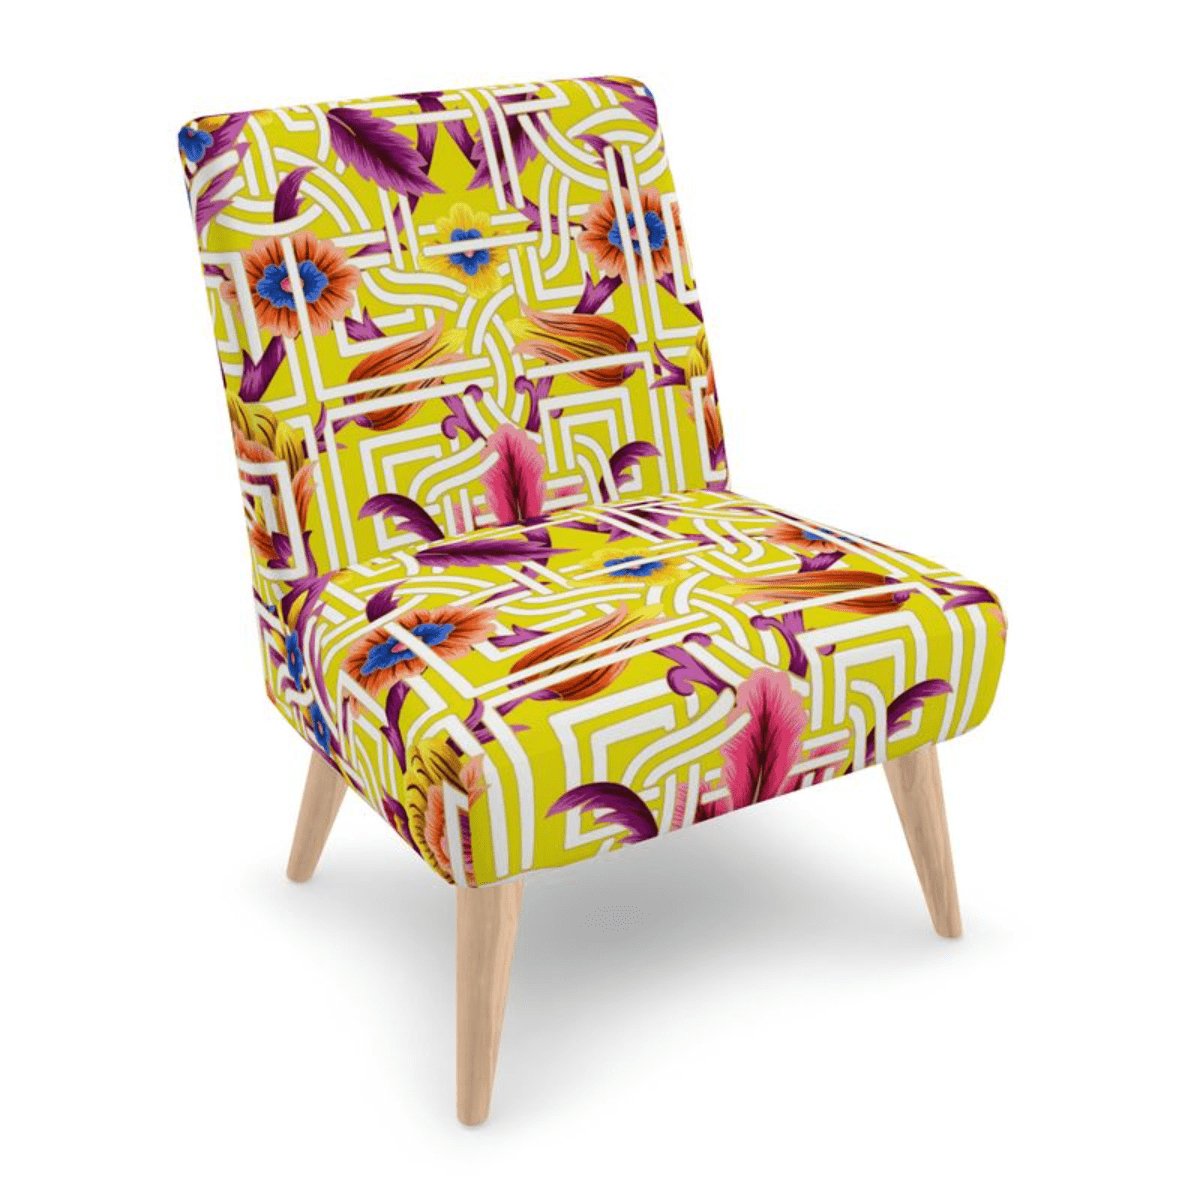 Kate McEnroe New York Cadenza Florale Maze Accent ChairAccent Chairs2340341